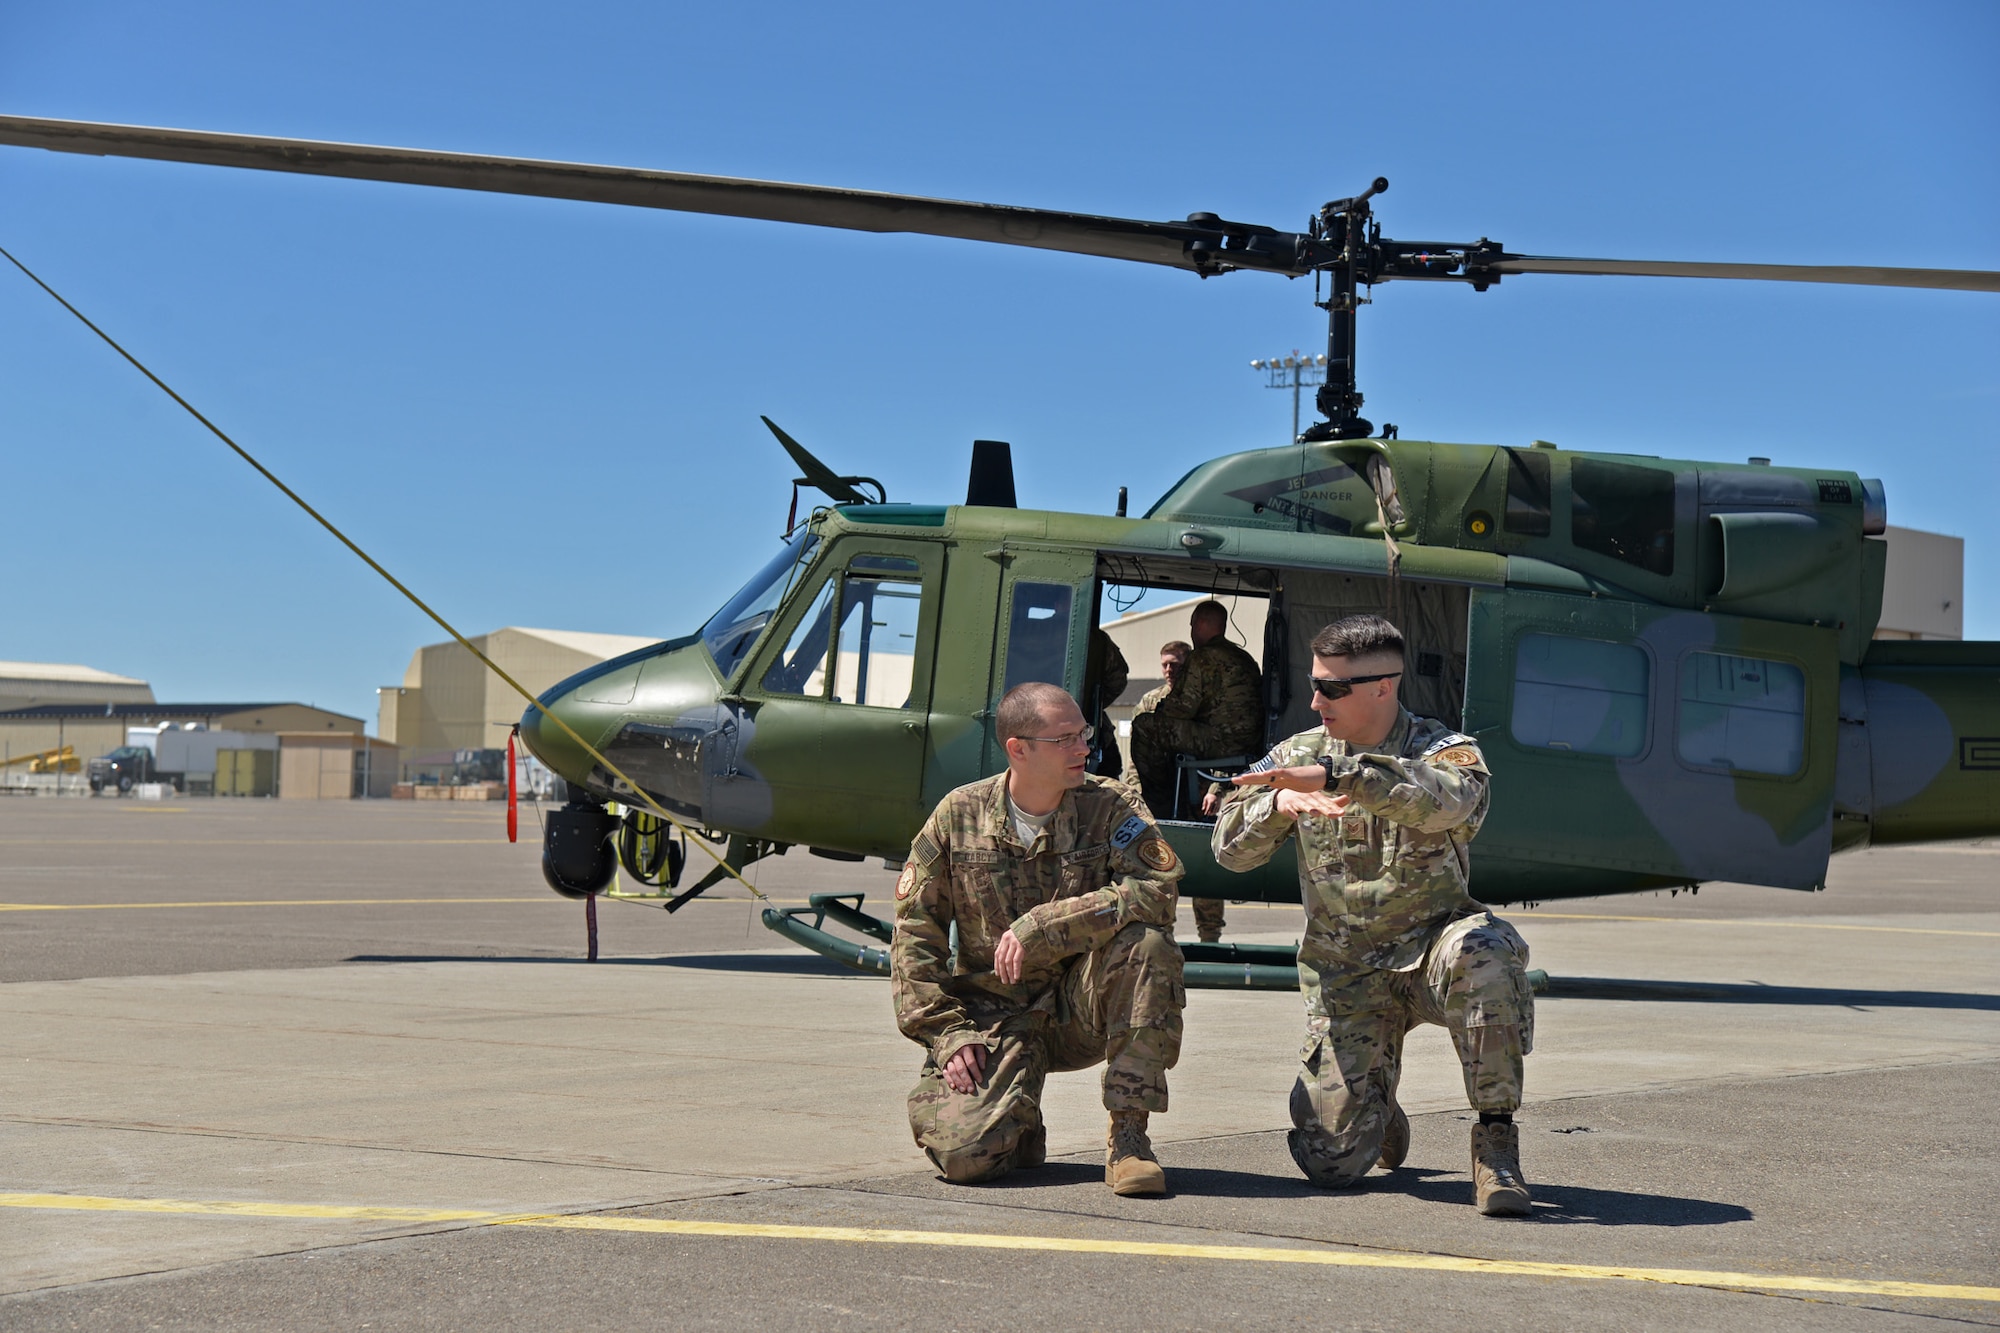 Staff Sgt. Jonathan Kitts, 741st Missile Security Forces Squadron Tactical Response Force flying program manager, right, trains Senior Airman Robert Darcy, 741st MSFS Convoy Response Force defender, during joint fires observer training May 8, 2017, at Malmstrom Air Force Base, Mont. JFO training for the CRF team allows the trained members to request, control and adjust surface-to-surface gun fire, provide air support targeting information and maintain communication with aircrew and the airborne fire team inside a support helicopter. (U.S. Air Force photo/Airman 1st Class Daniel Brosam)